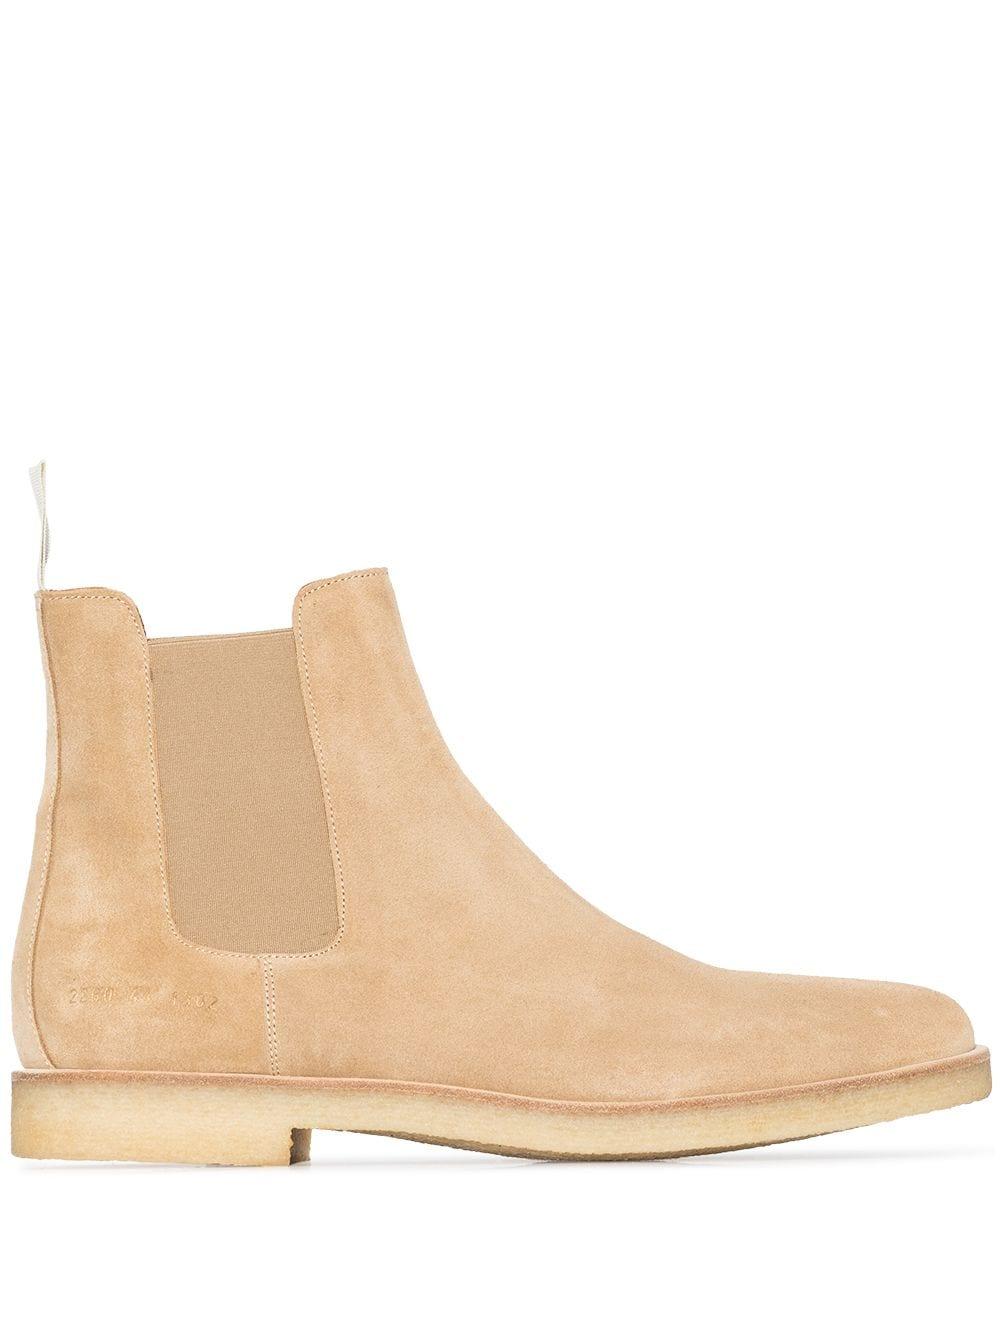 Common Projects Suede Nude Cheslsea Boots for Men | Lyst